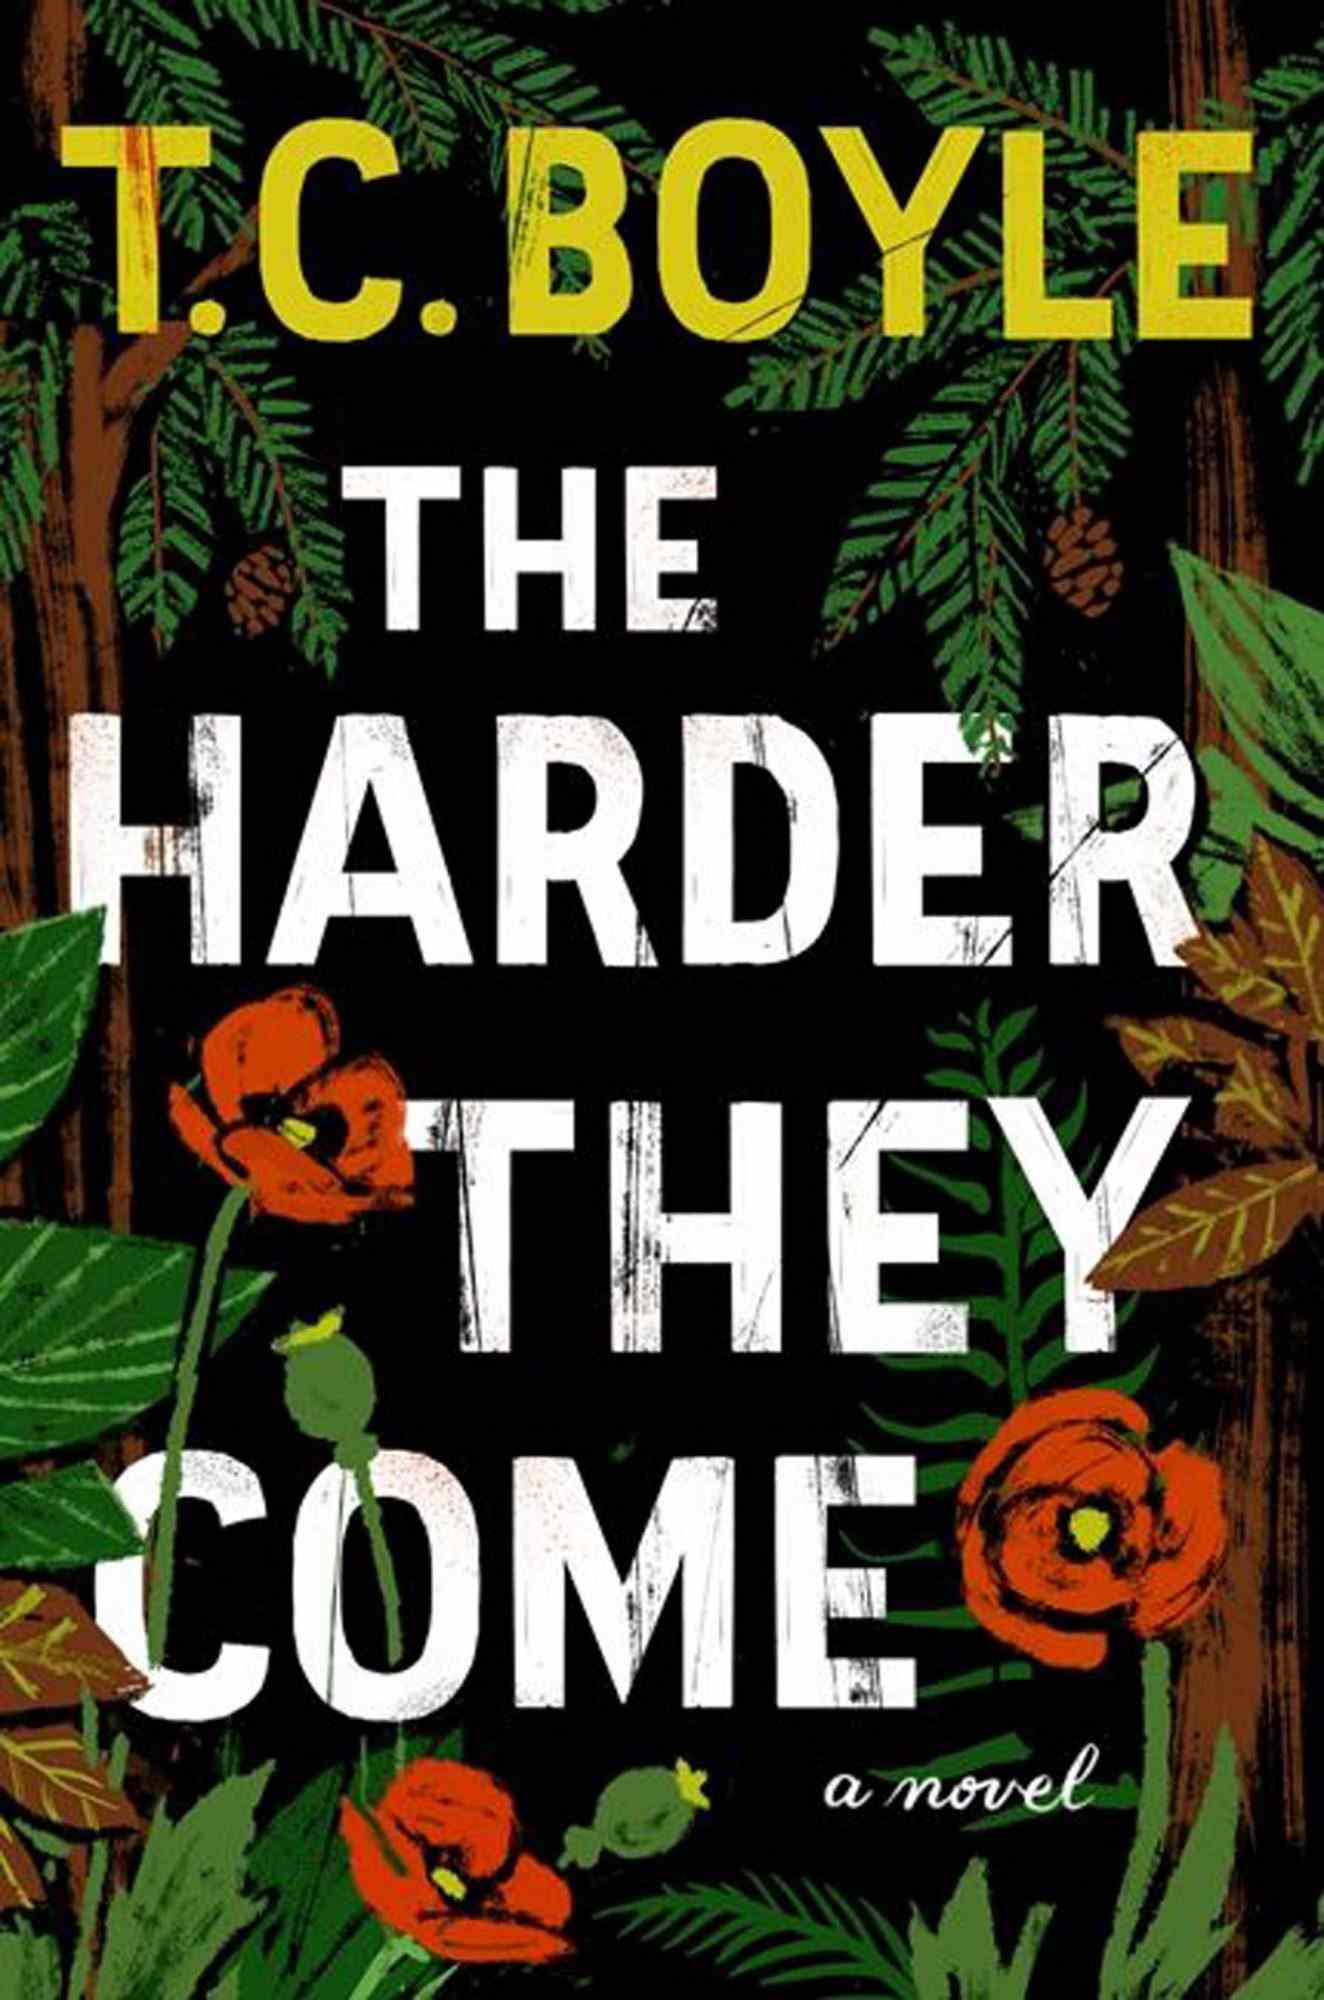 The Harder They Come,&nbsp;by T.C. Boyle